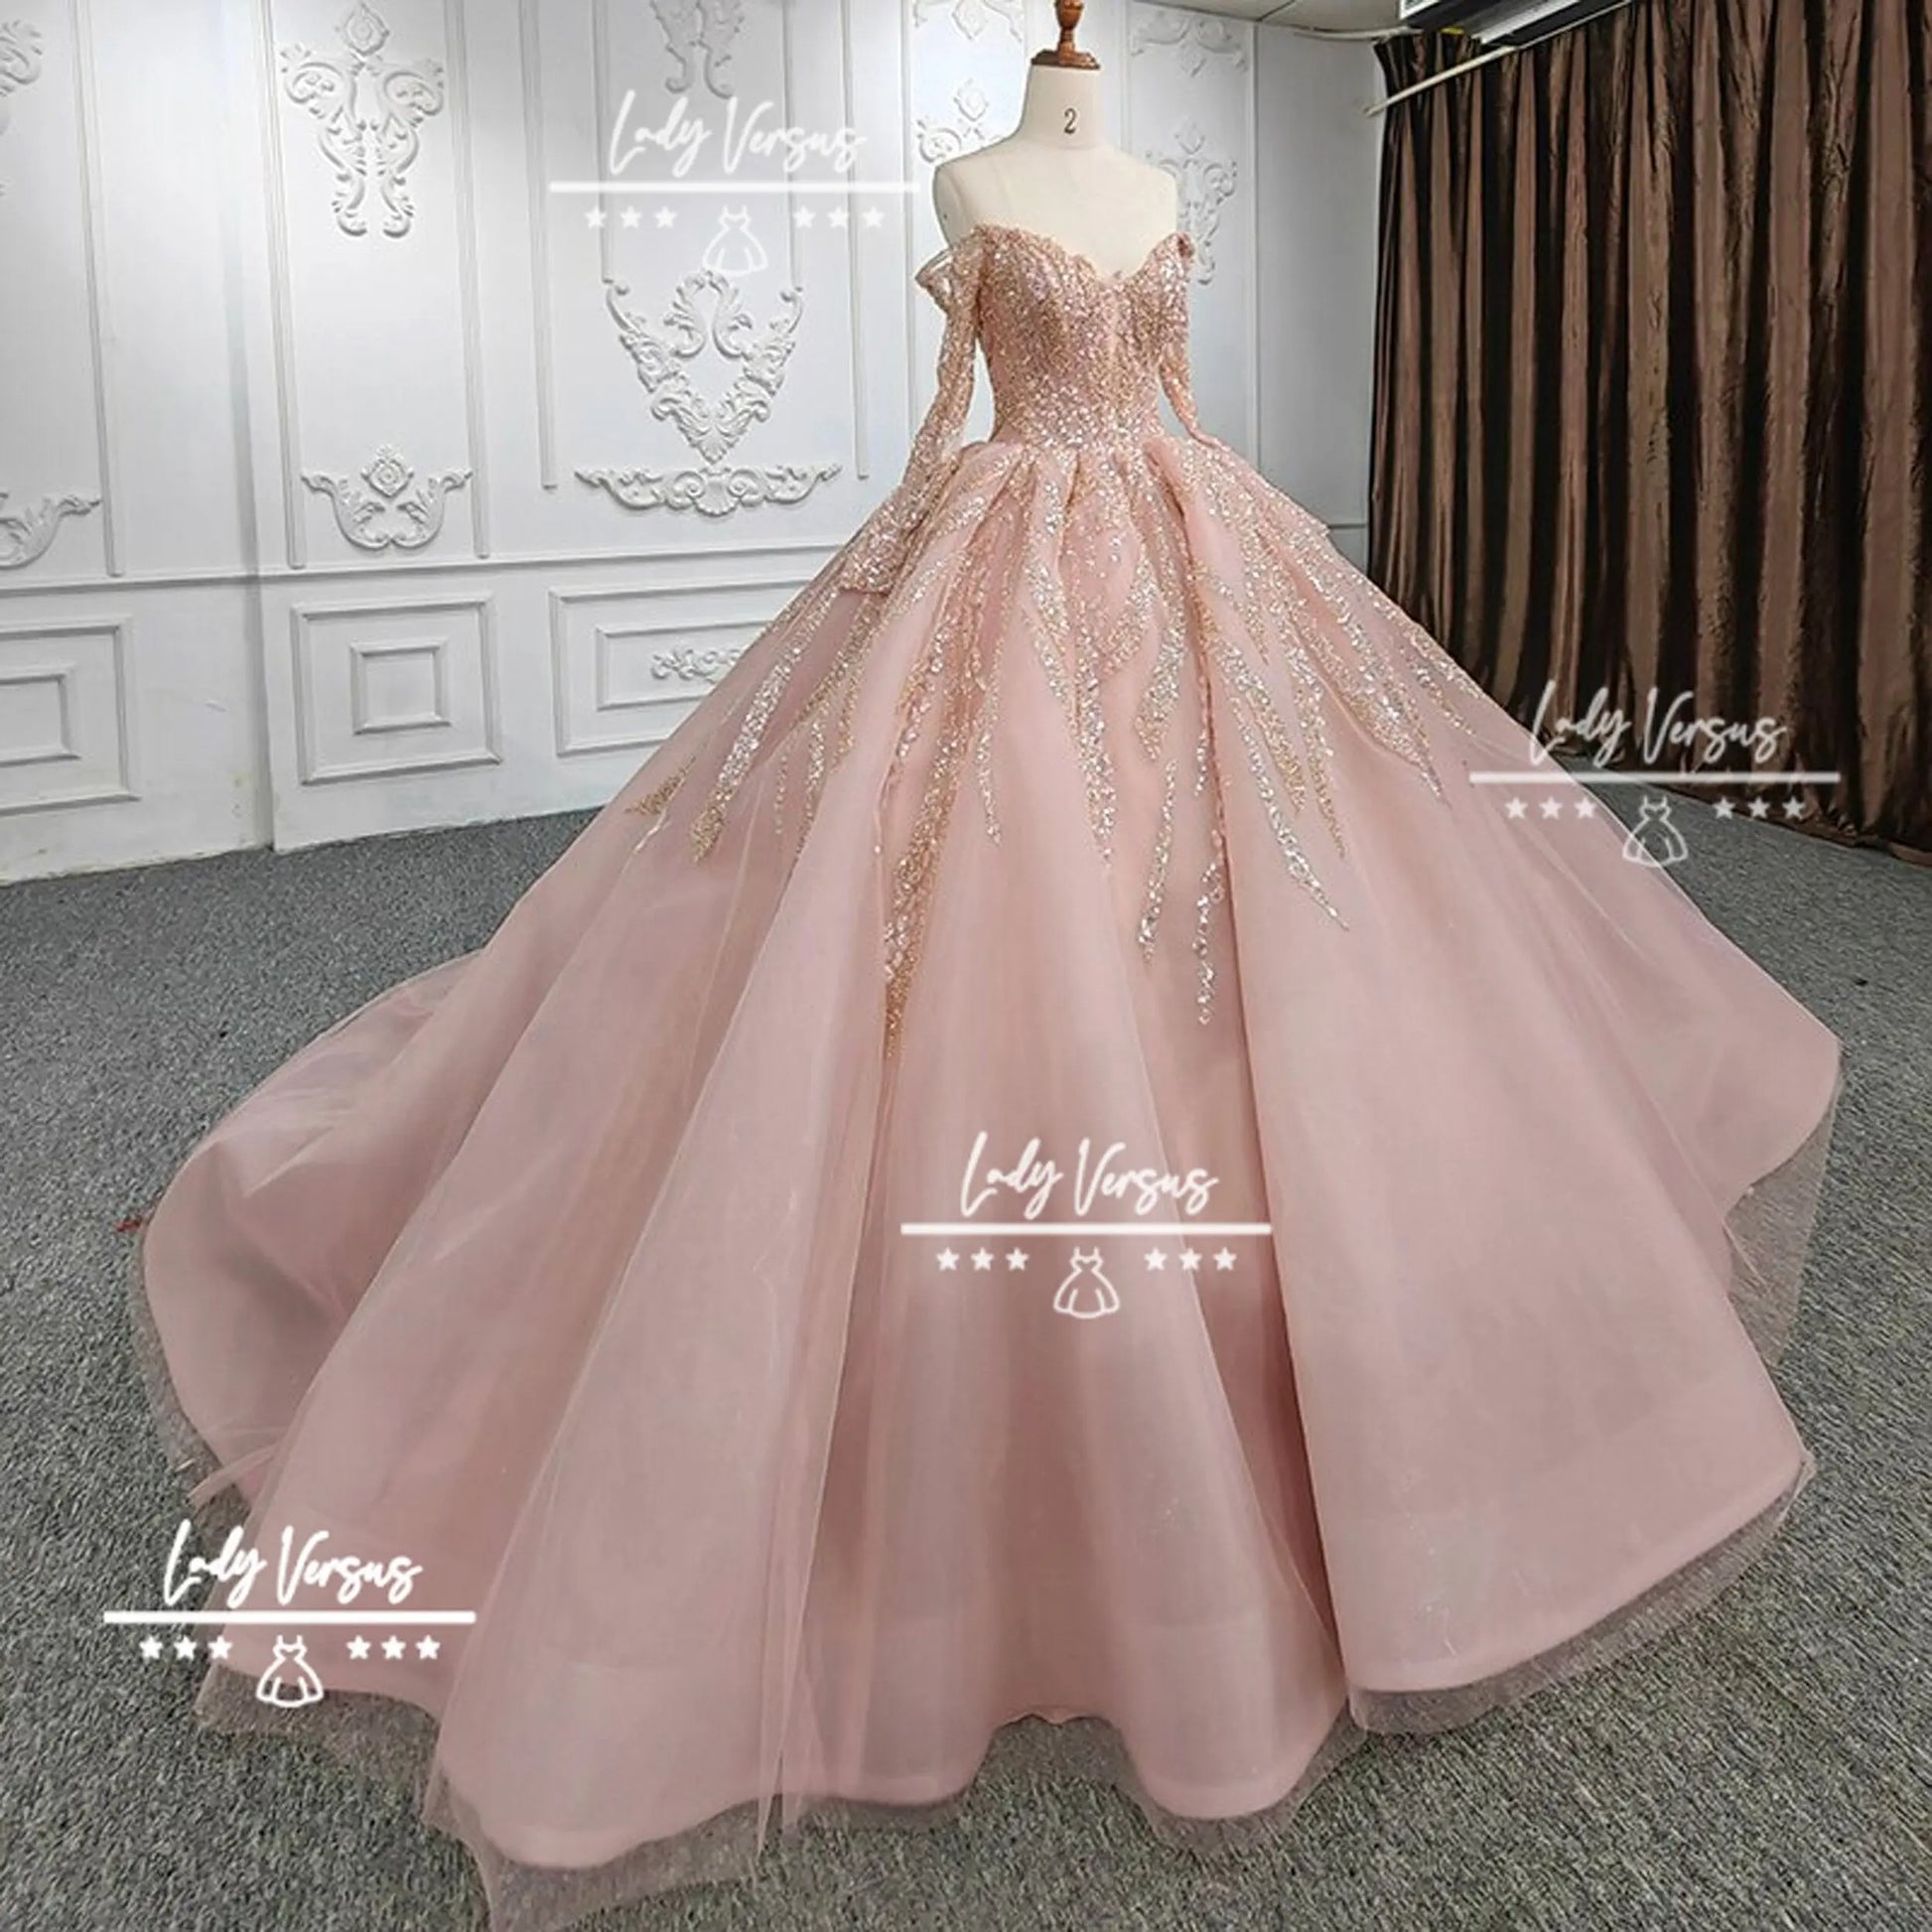 Luxury bridal princess dress/ Extravagant bridal gown/Gorgeous tulle cake skirt wedding dress/ ball gown/prom dress Lady Versus